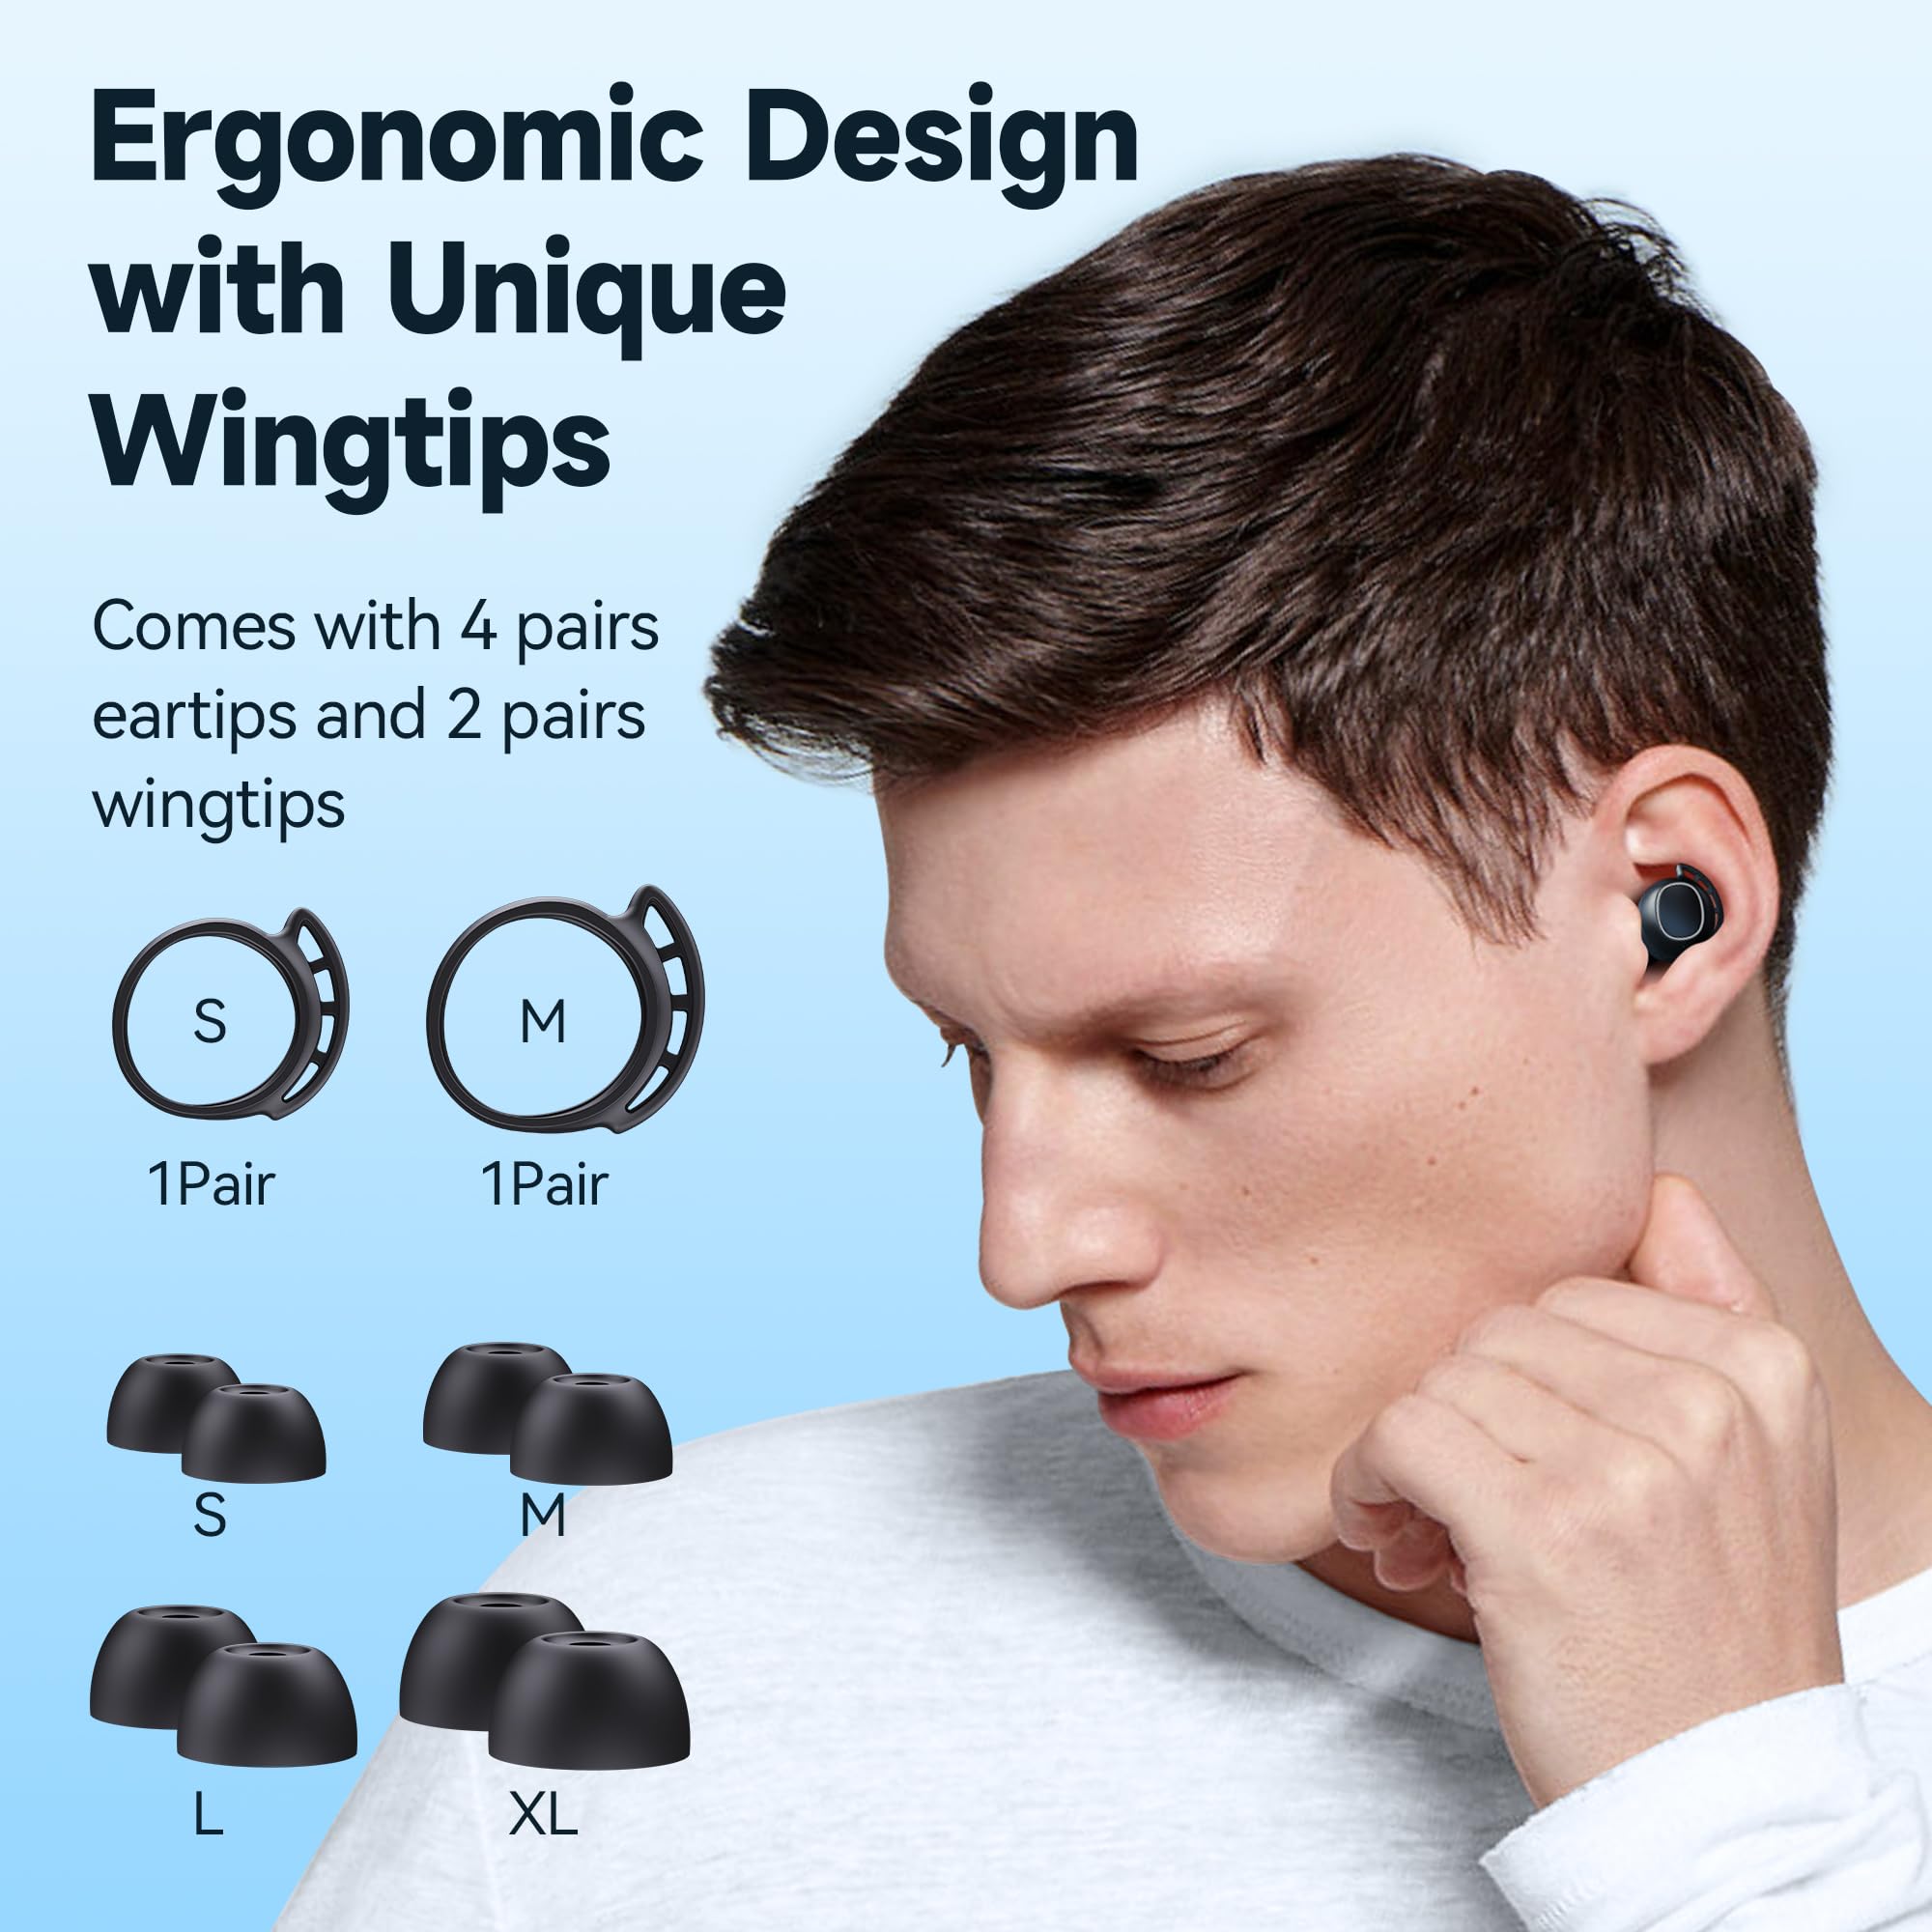 Bluetooth Headphones Wireless Earbuds 120H Playtime Ear Buds IPX7 Waterproof Earphones Digital Power Display Headsets with Charging Case and Mic for Sports Fitness Laptop TV Computer Cell Phone Games